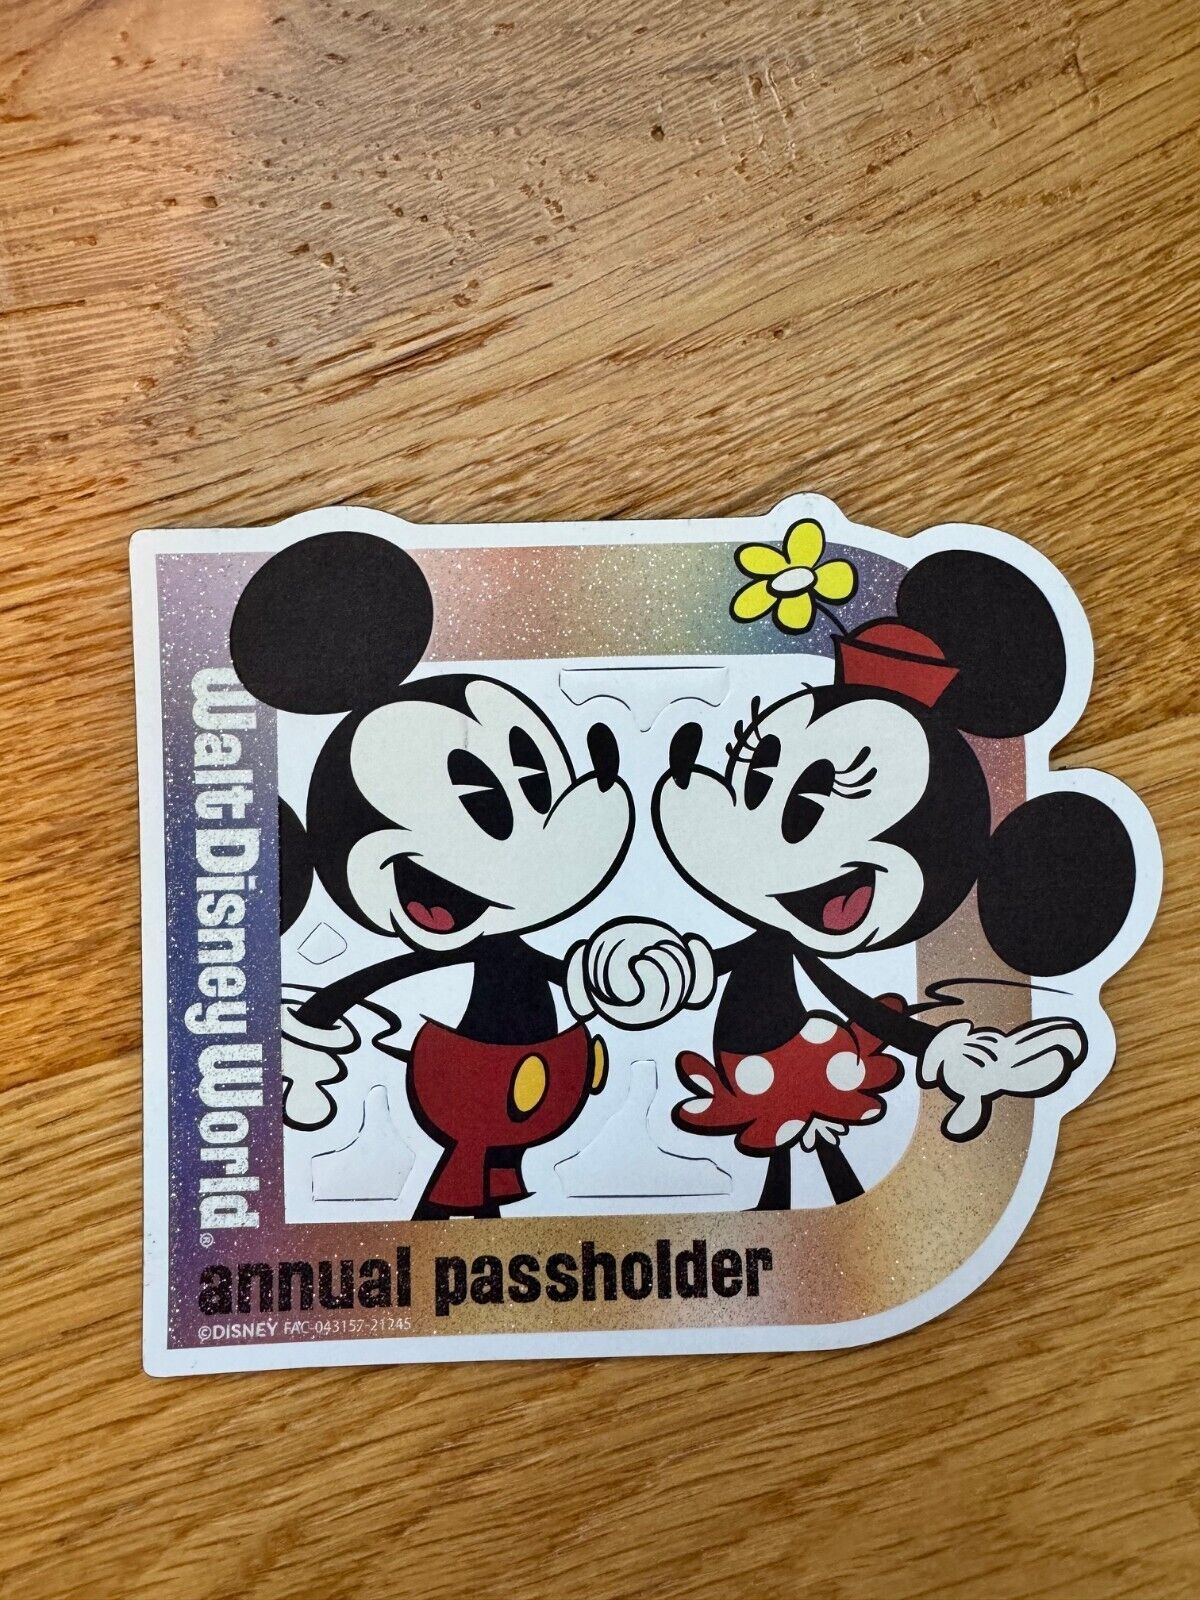 NEW 2022 Disney 50th Anniversary Annual Passholder Magnet Mickey Minnie Mouse